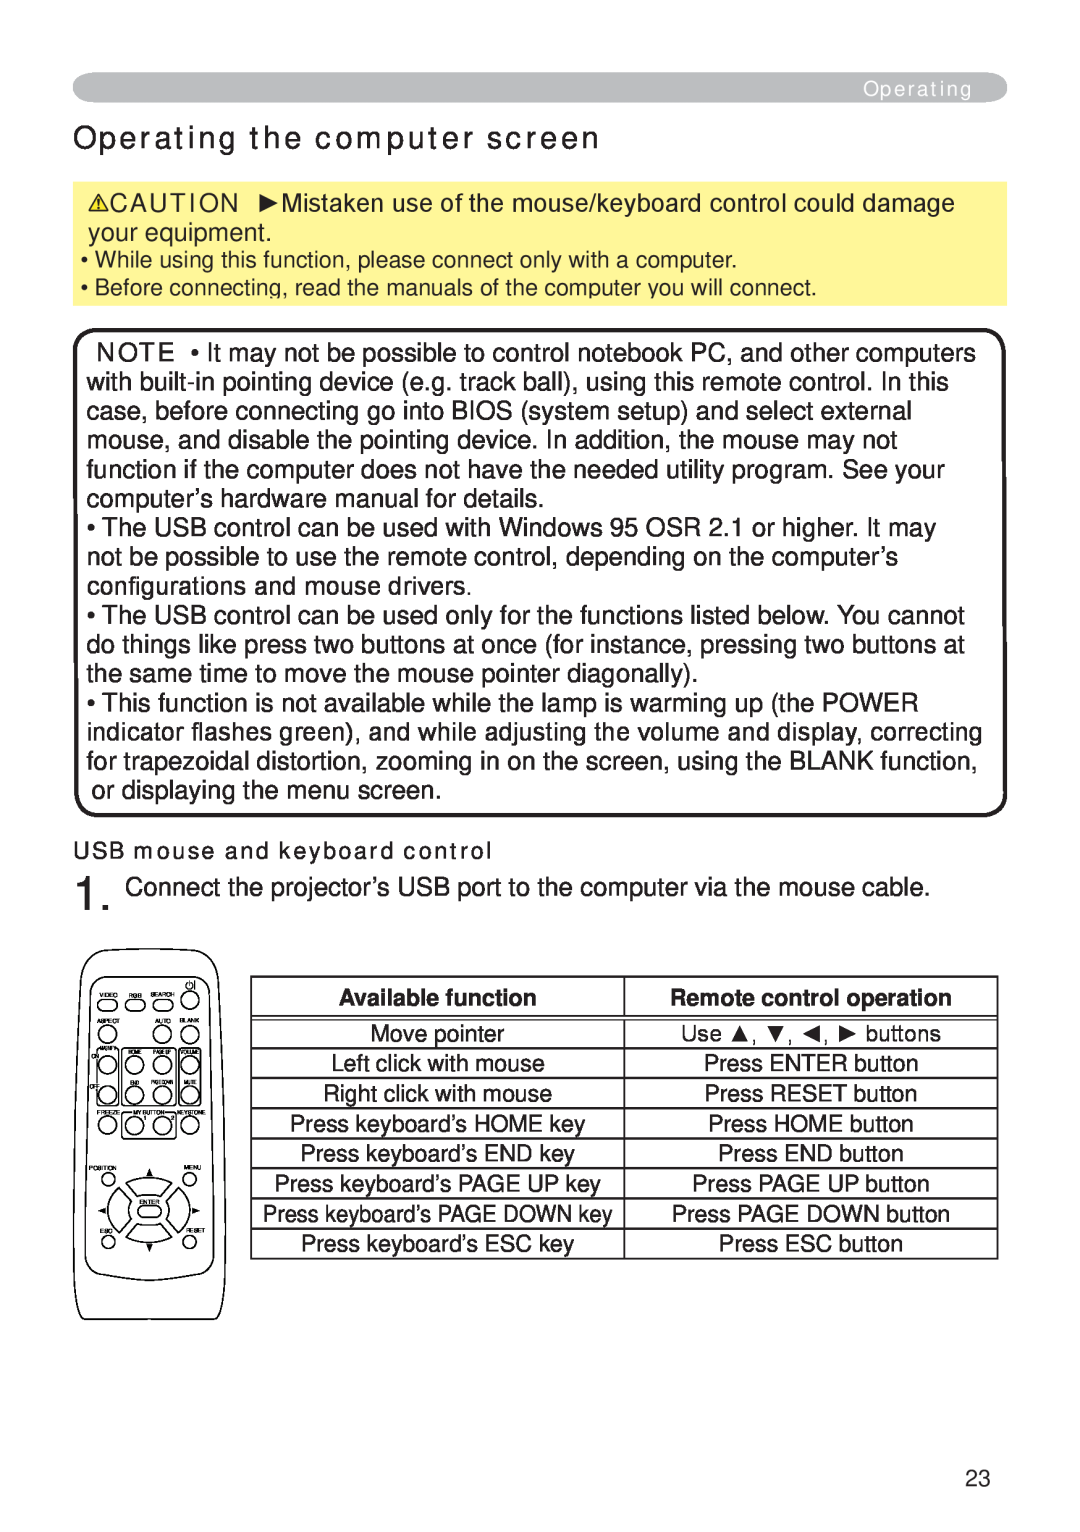 Hitachi CP-X265 user manual Operating the computer screen, USB mouse and keyboard control, Available function 